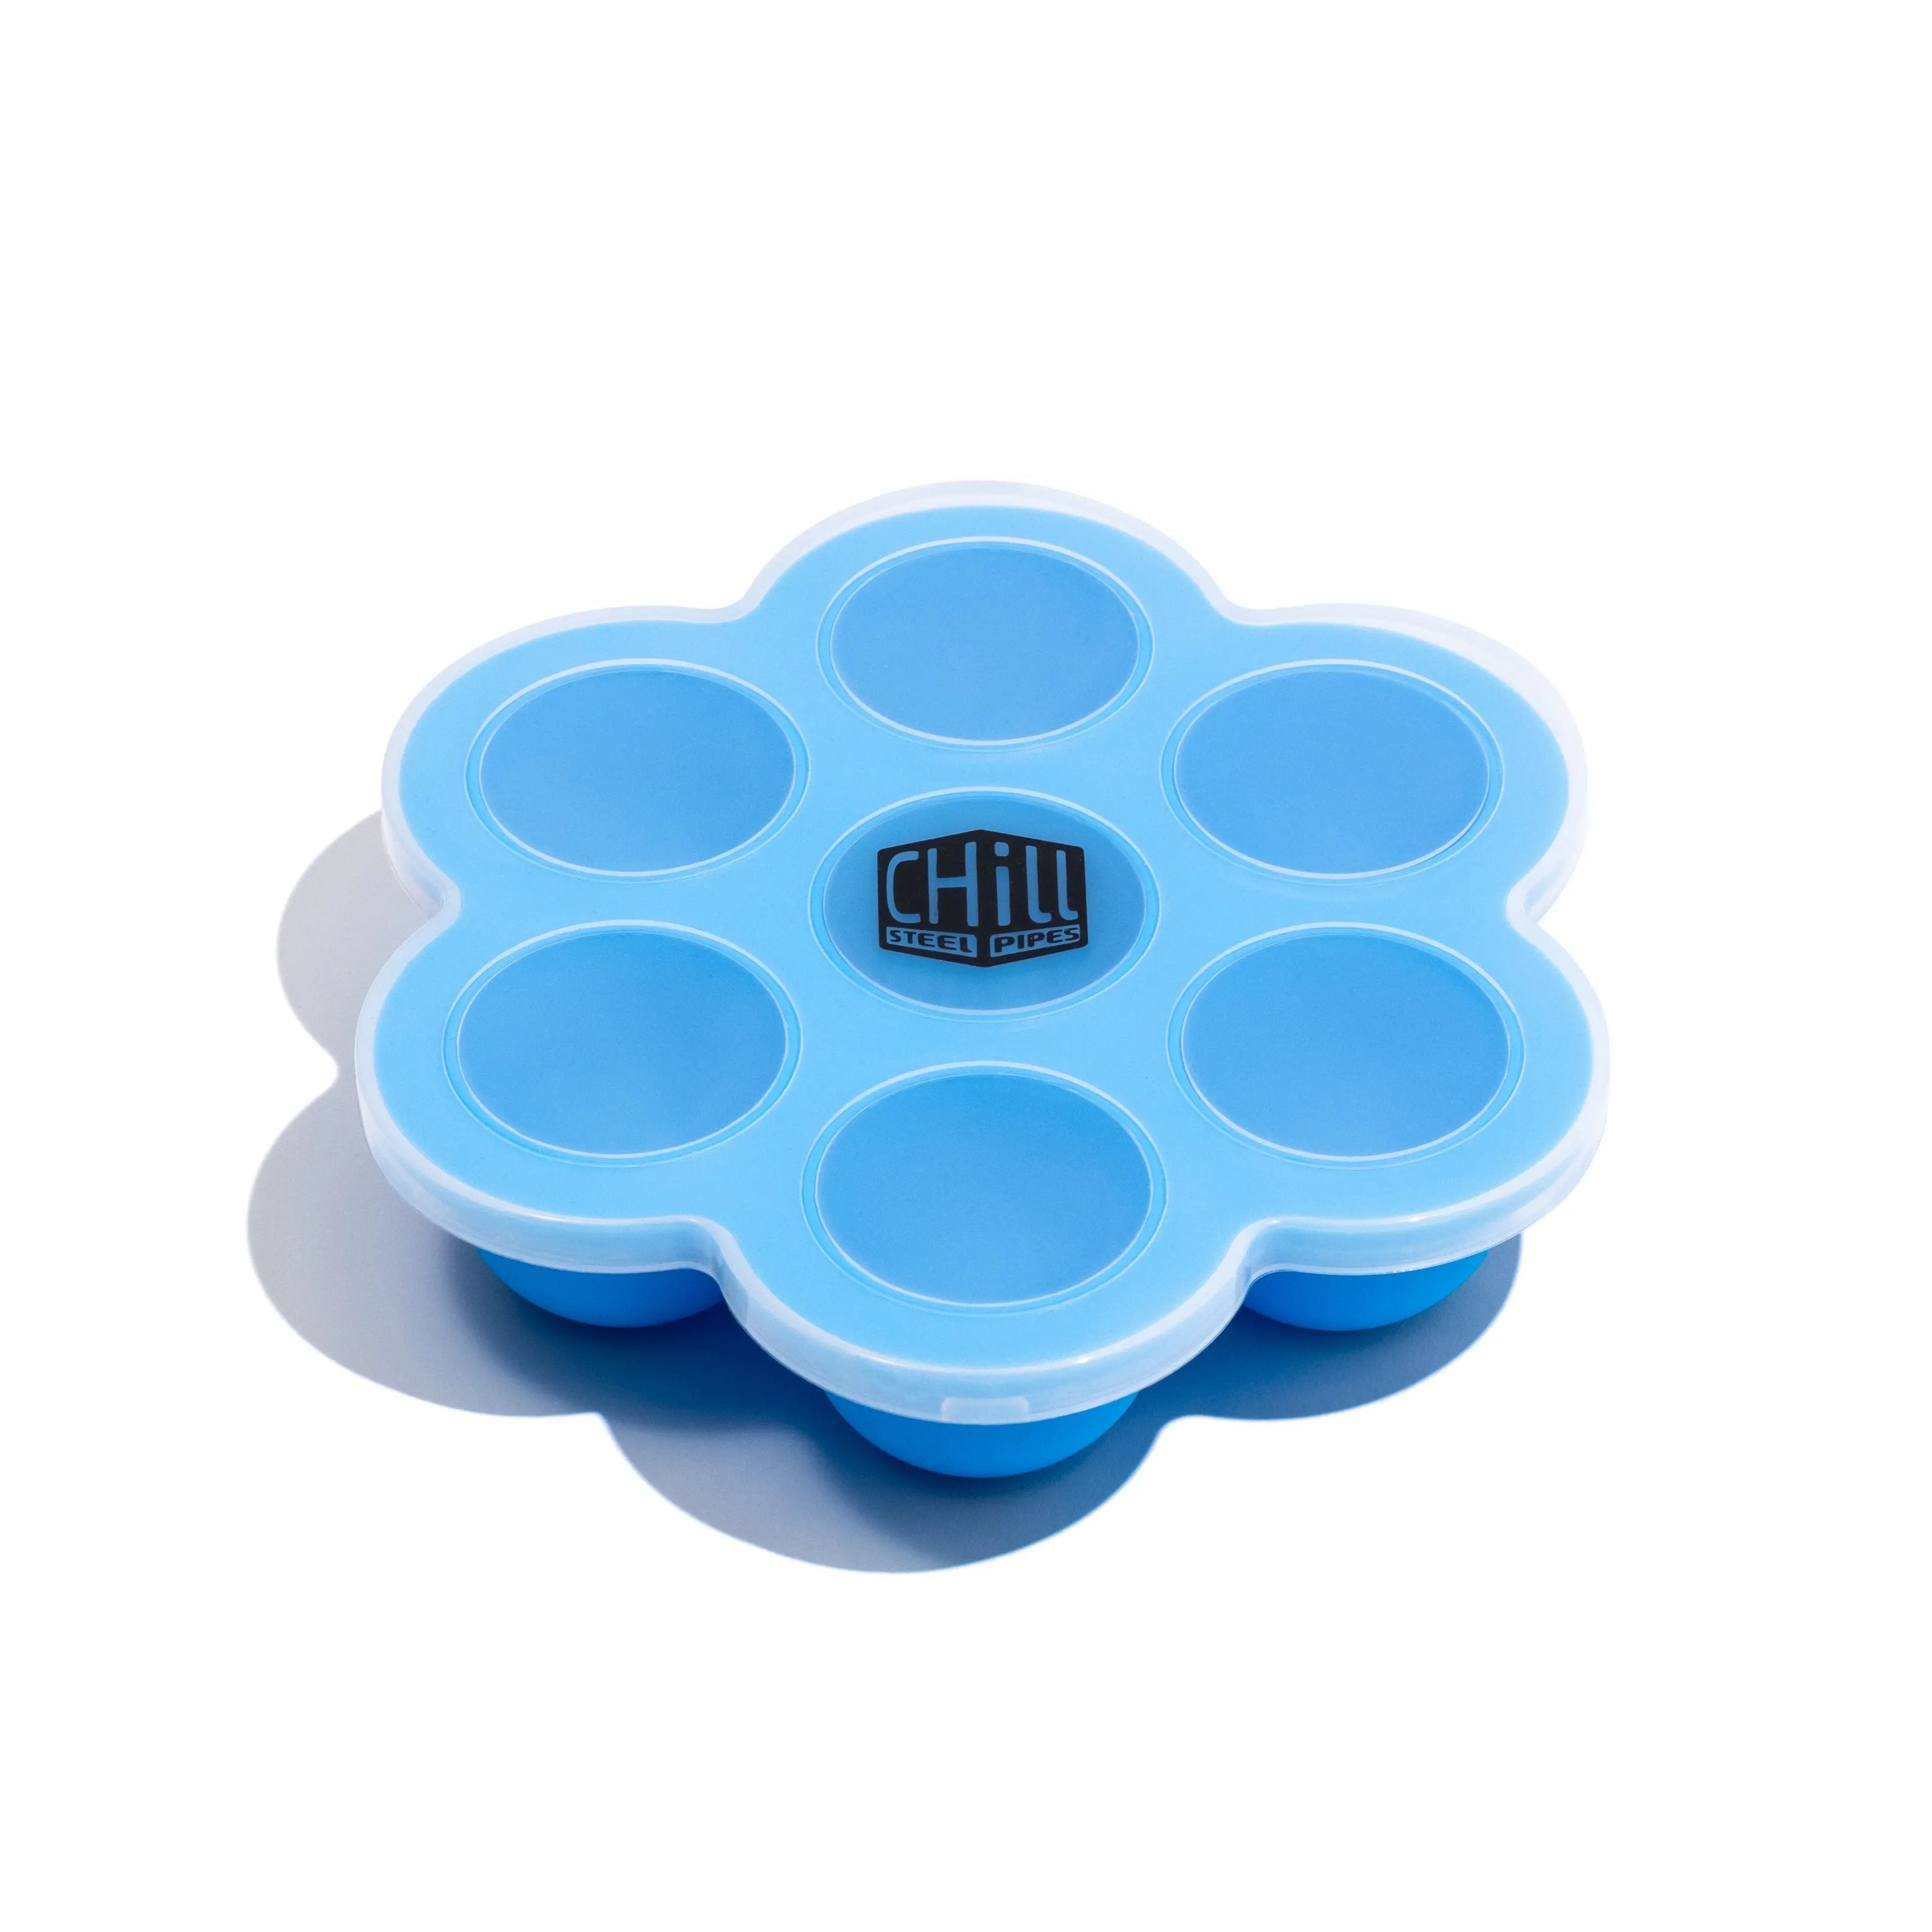 Chill - Extra Large Ice Cube Tray Set – Chill Steel Pipes